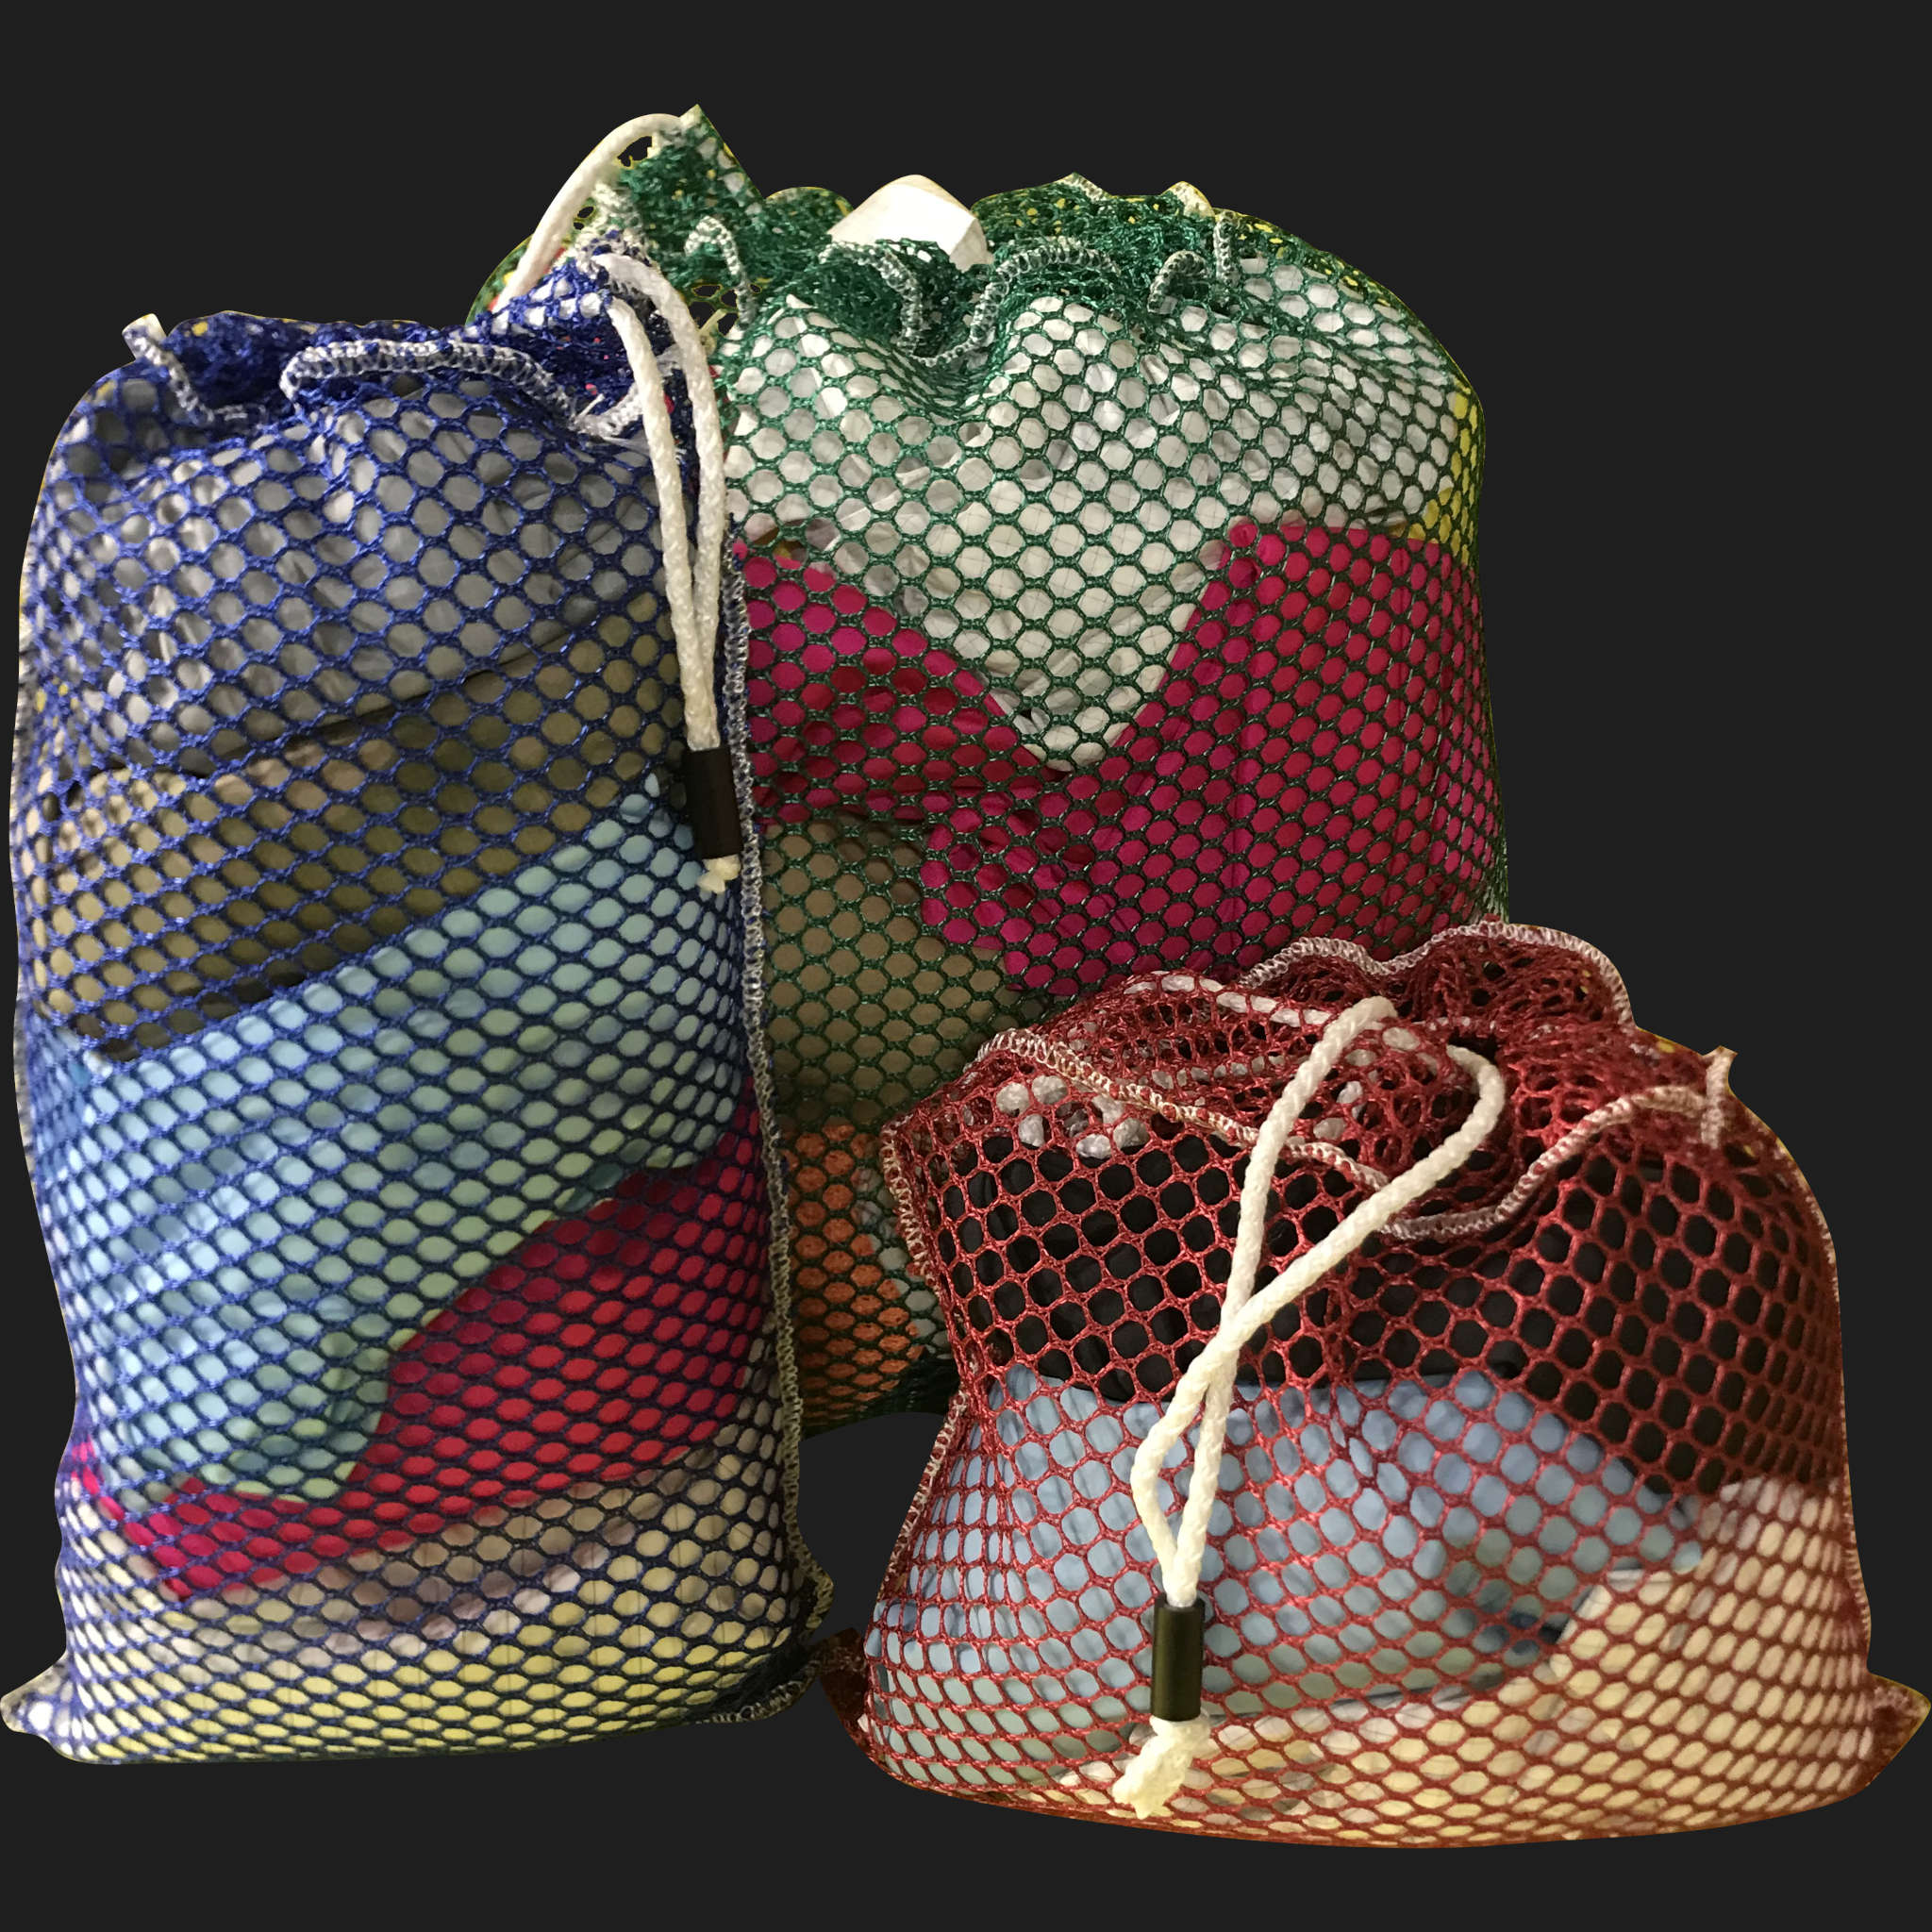 32" x 60" Customized Mesh-Net-Laundry Bags Heavy Duty with Cord and barrellock closure